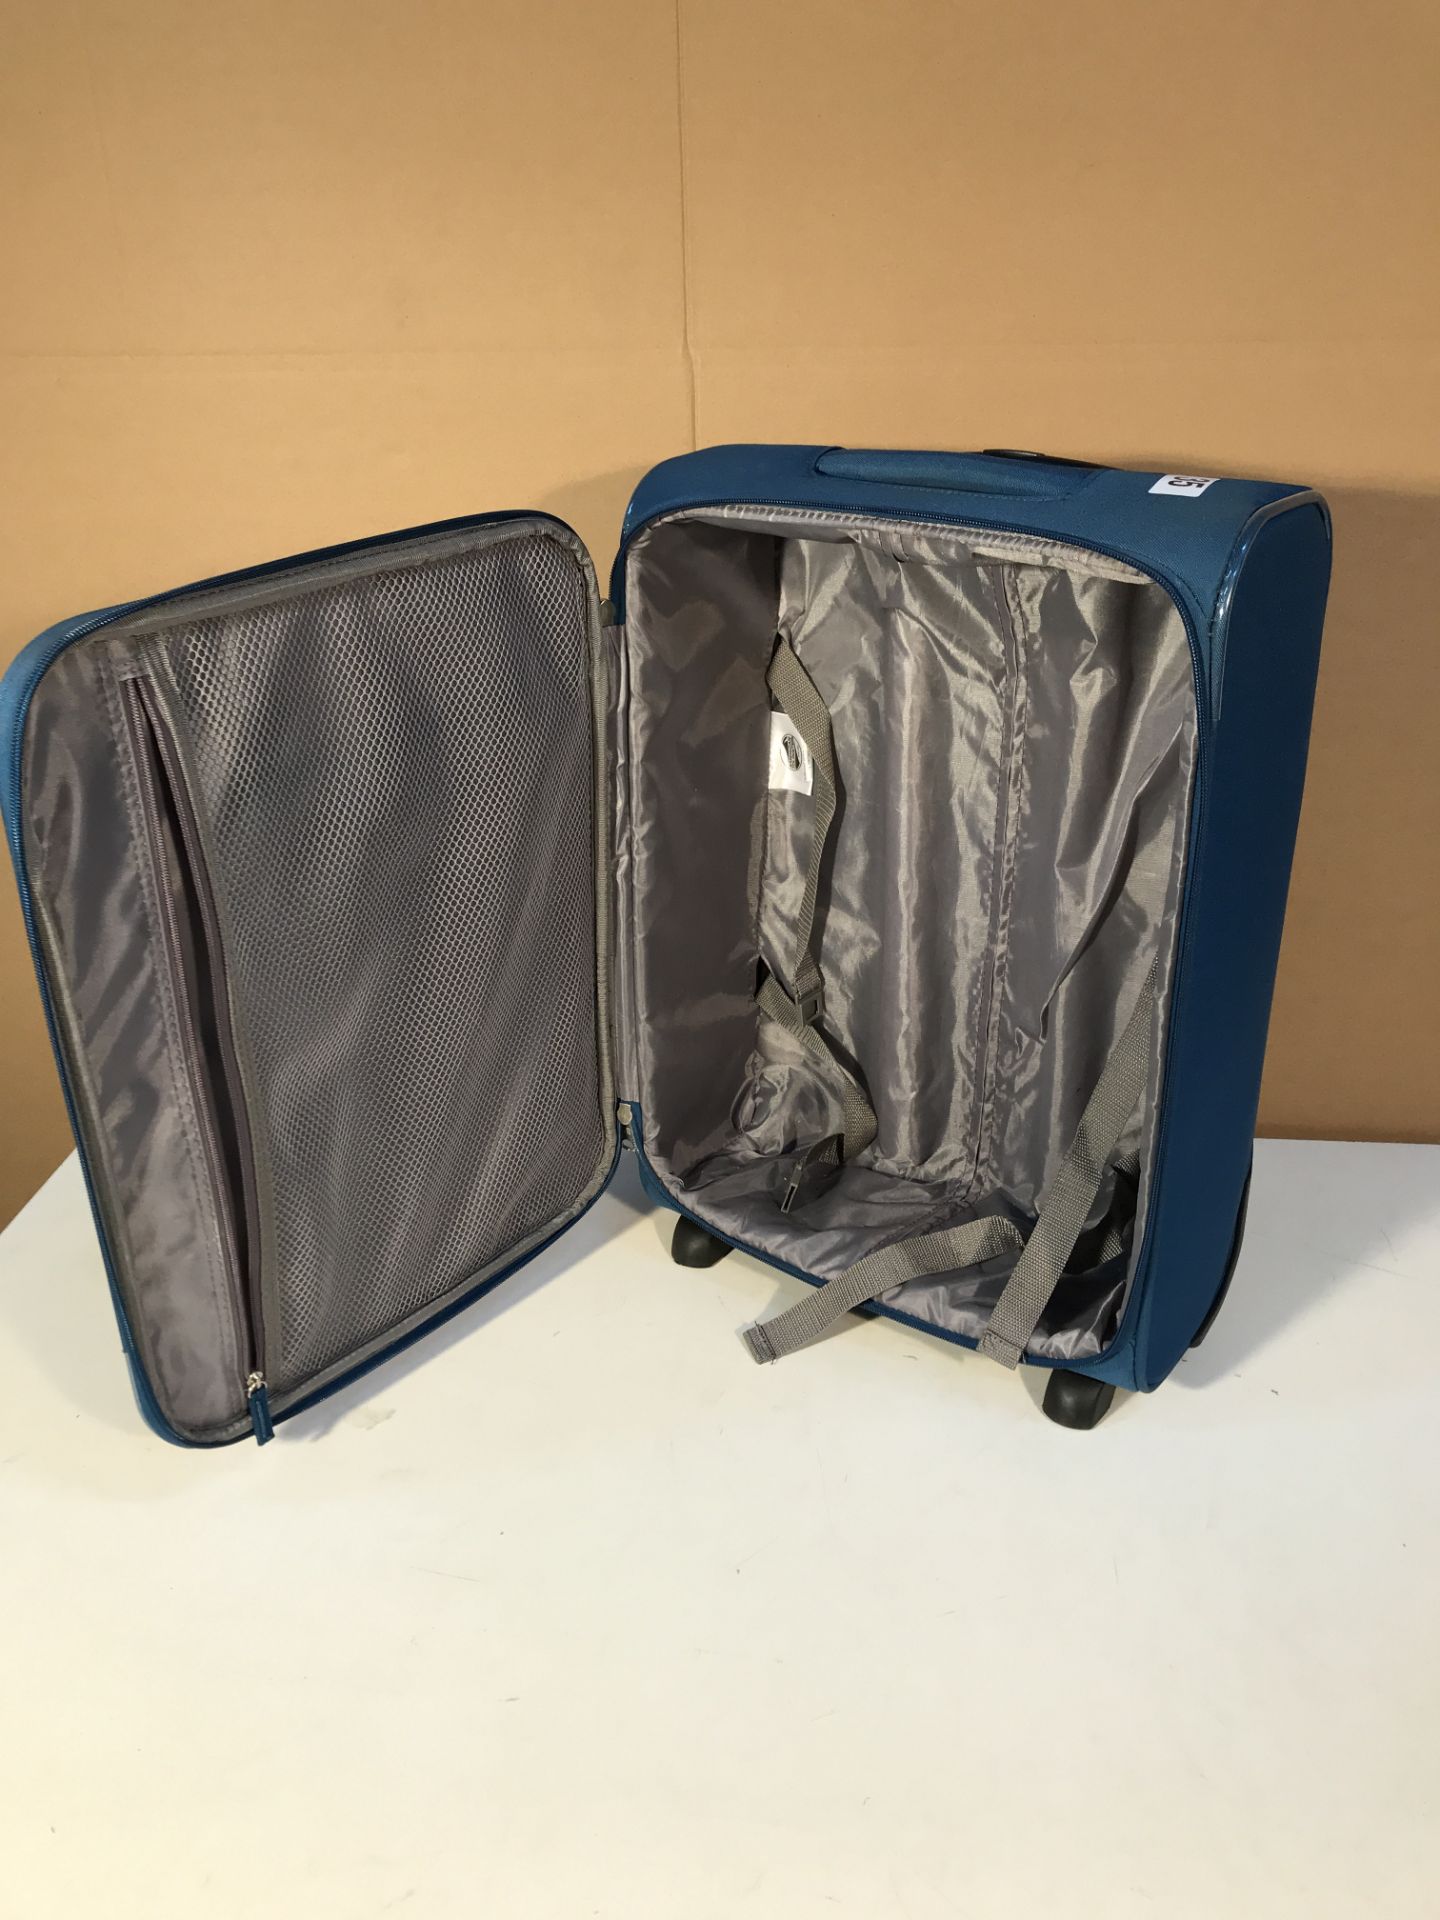 American Tourister Suit Case - Image 3 of 4